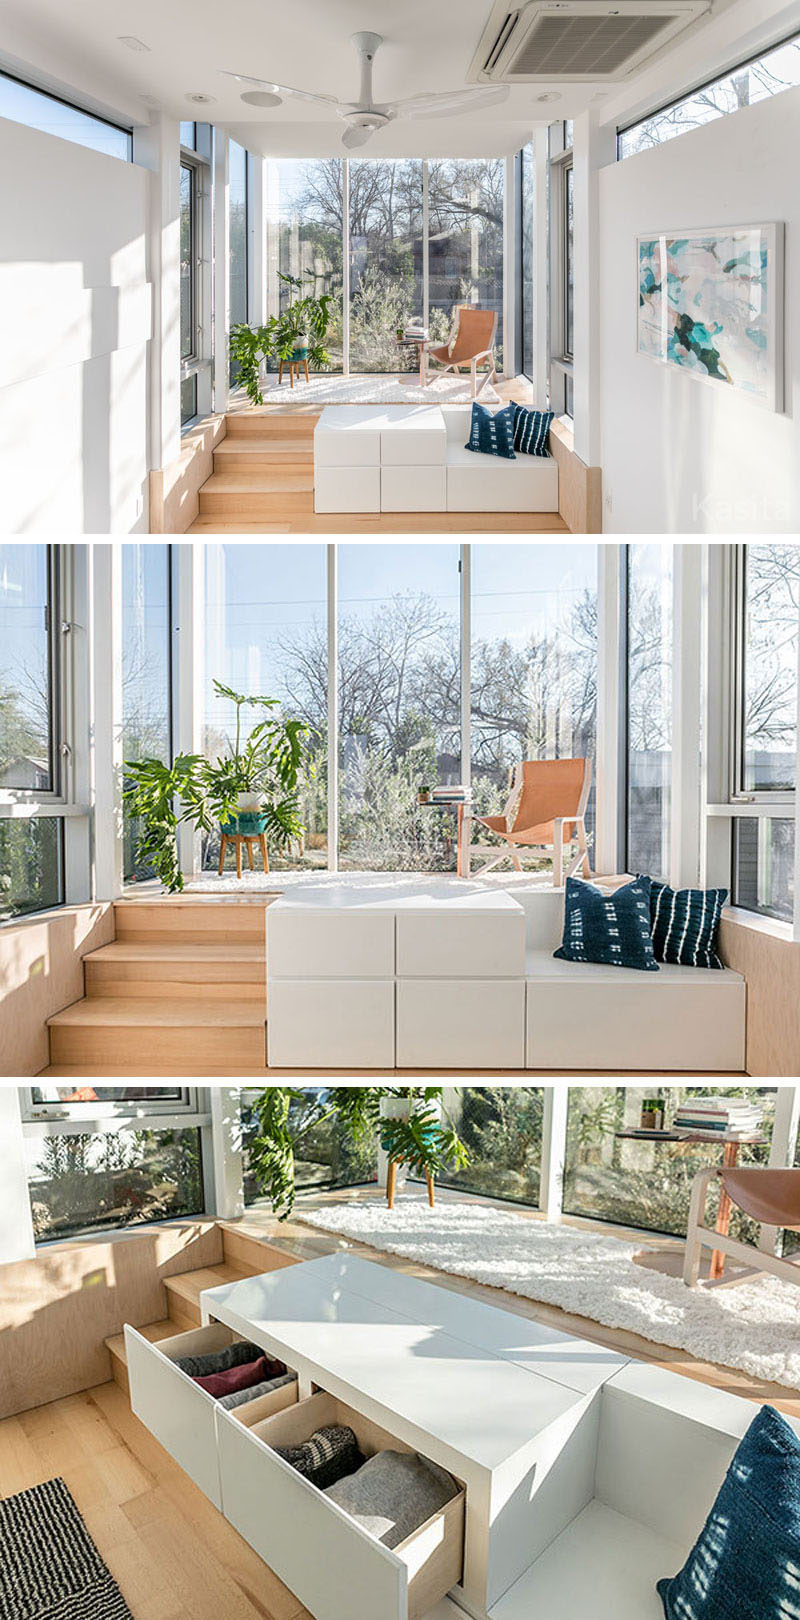 In this modern tiny house, there's a raised platform that's surrounded by floor to ceiling windows, allowing plenty of light to fill the small space. A flat-screen television is hidden within the white storage cube with drawers, that also has a small bench next to it. 